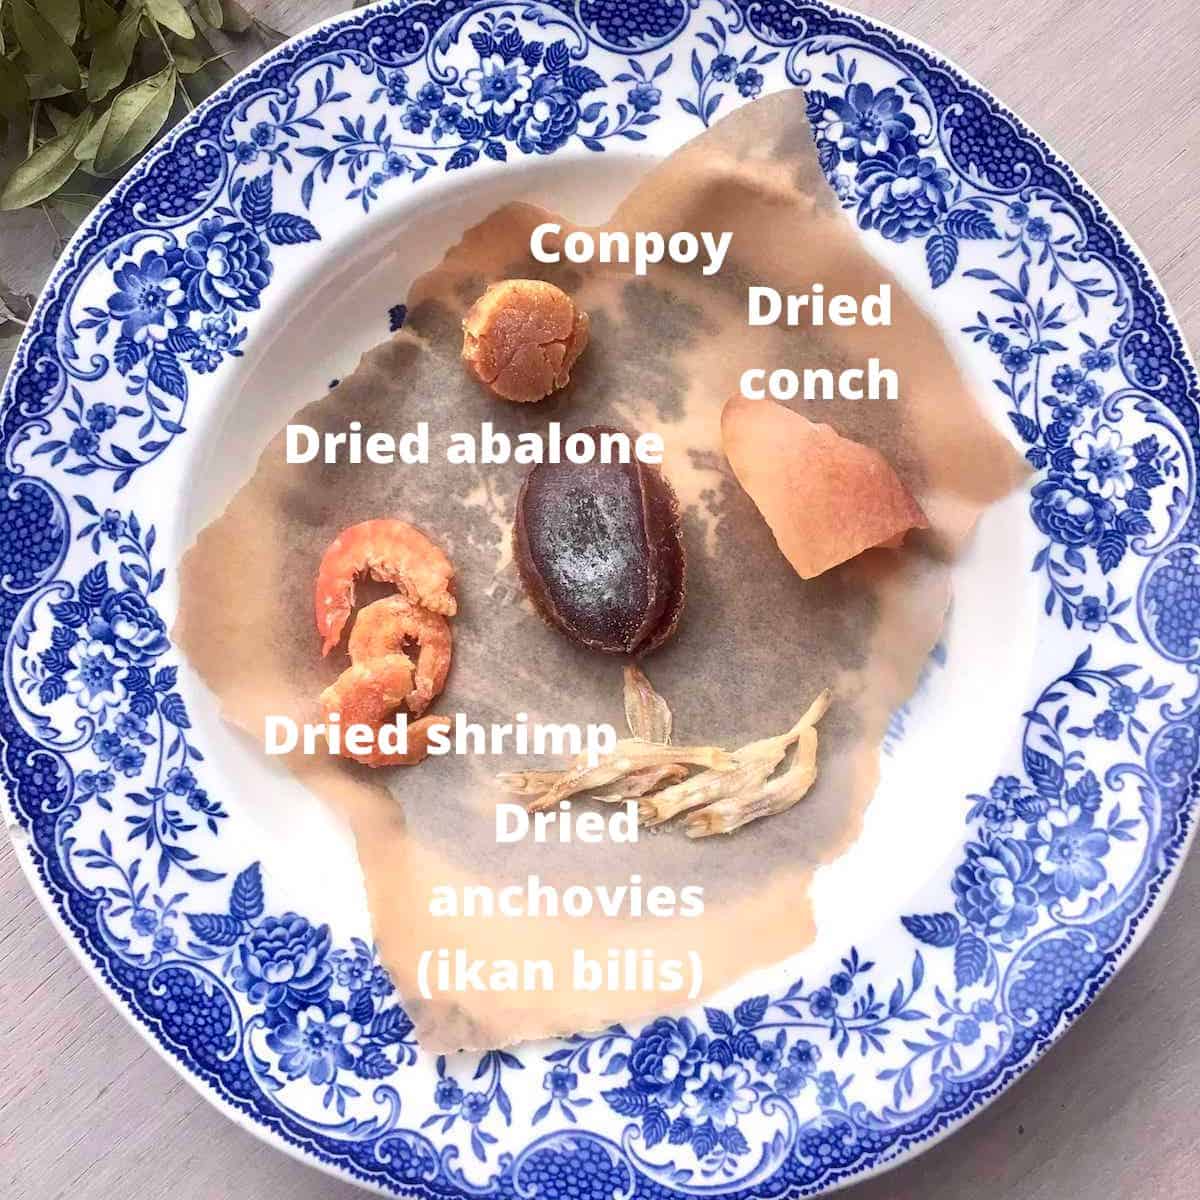 Dried scallop substitues on a plate, with the names labelled on the ingredients.